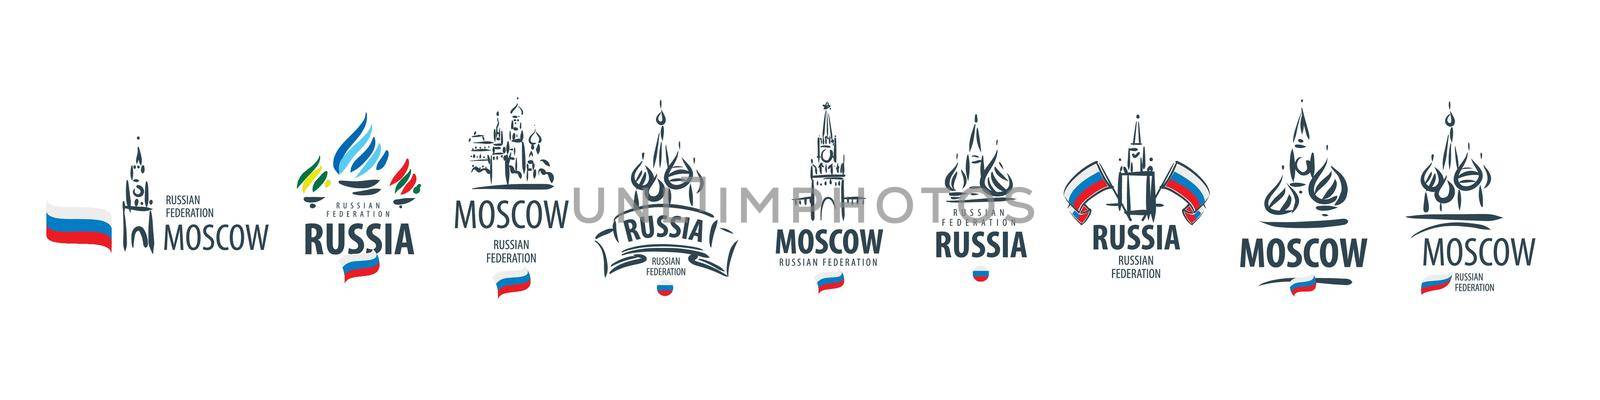 A set of vector icons of Russia, drawn by hand on a white background by butenkow